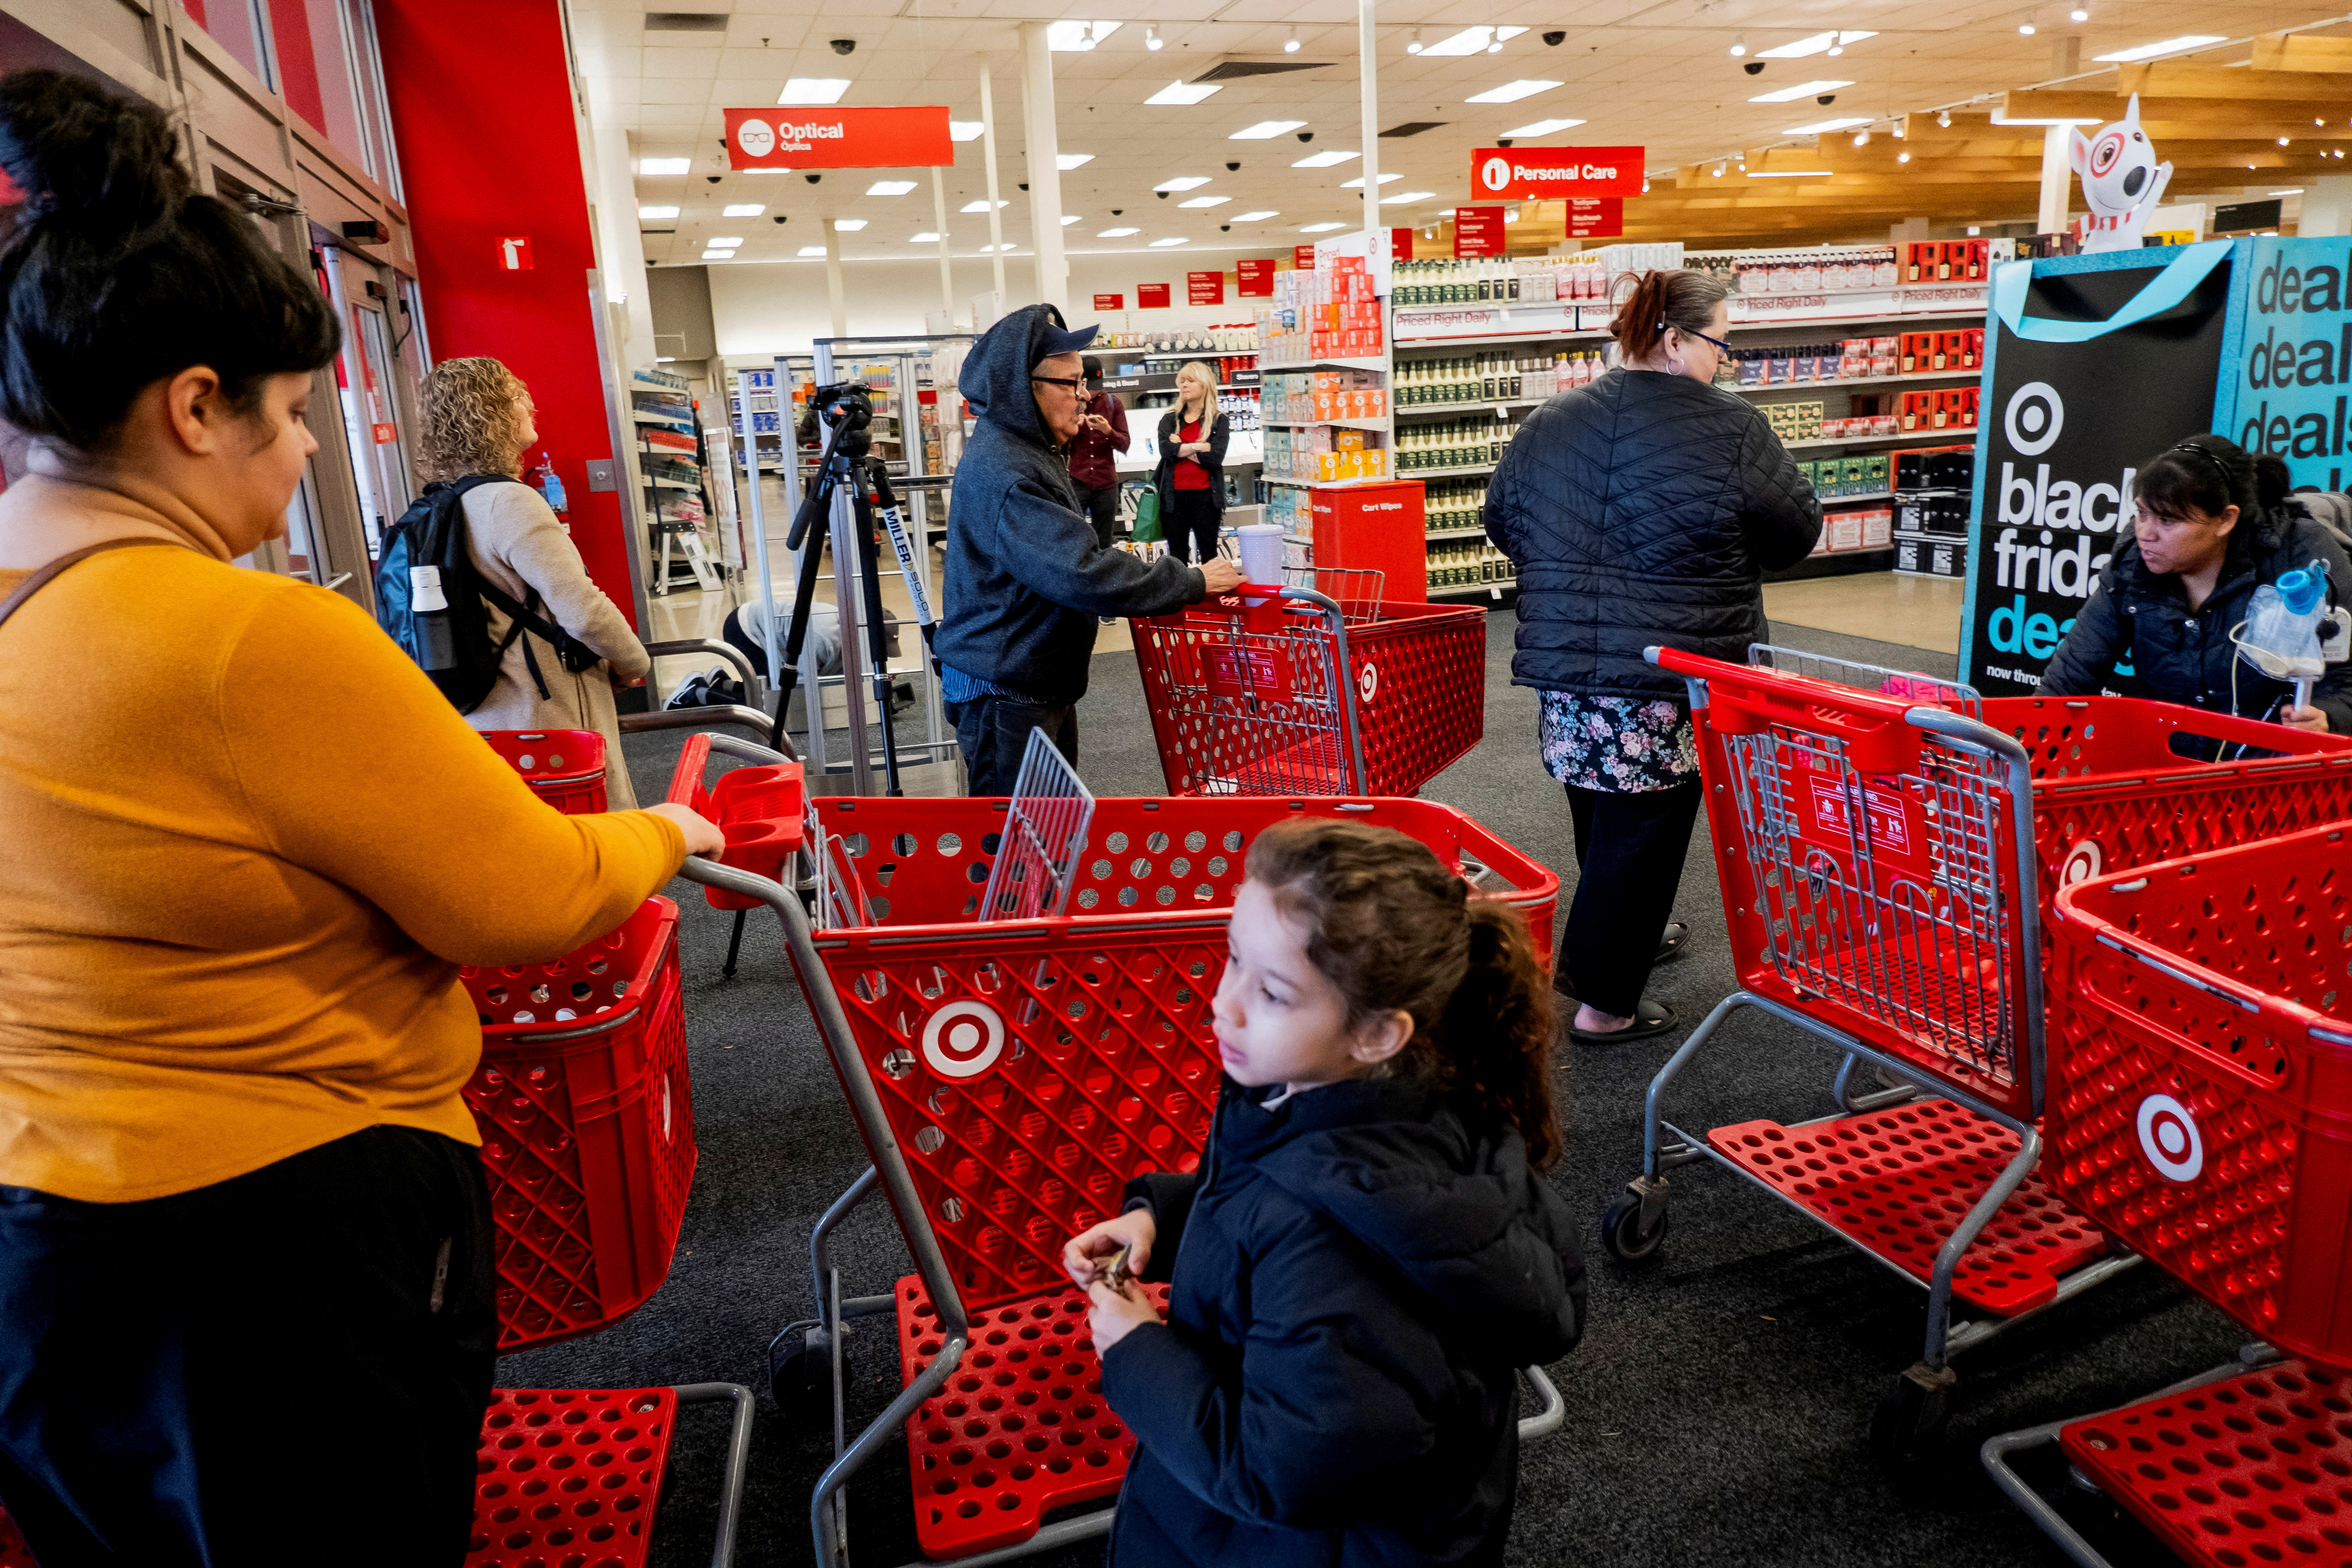 Shoppers converge in a Target store ahead of the Thanksgiving holiday